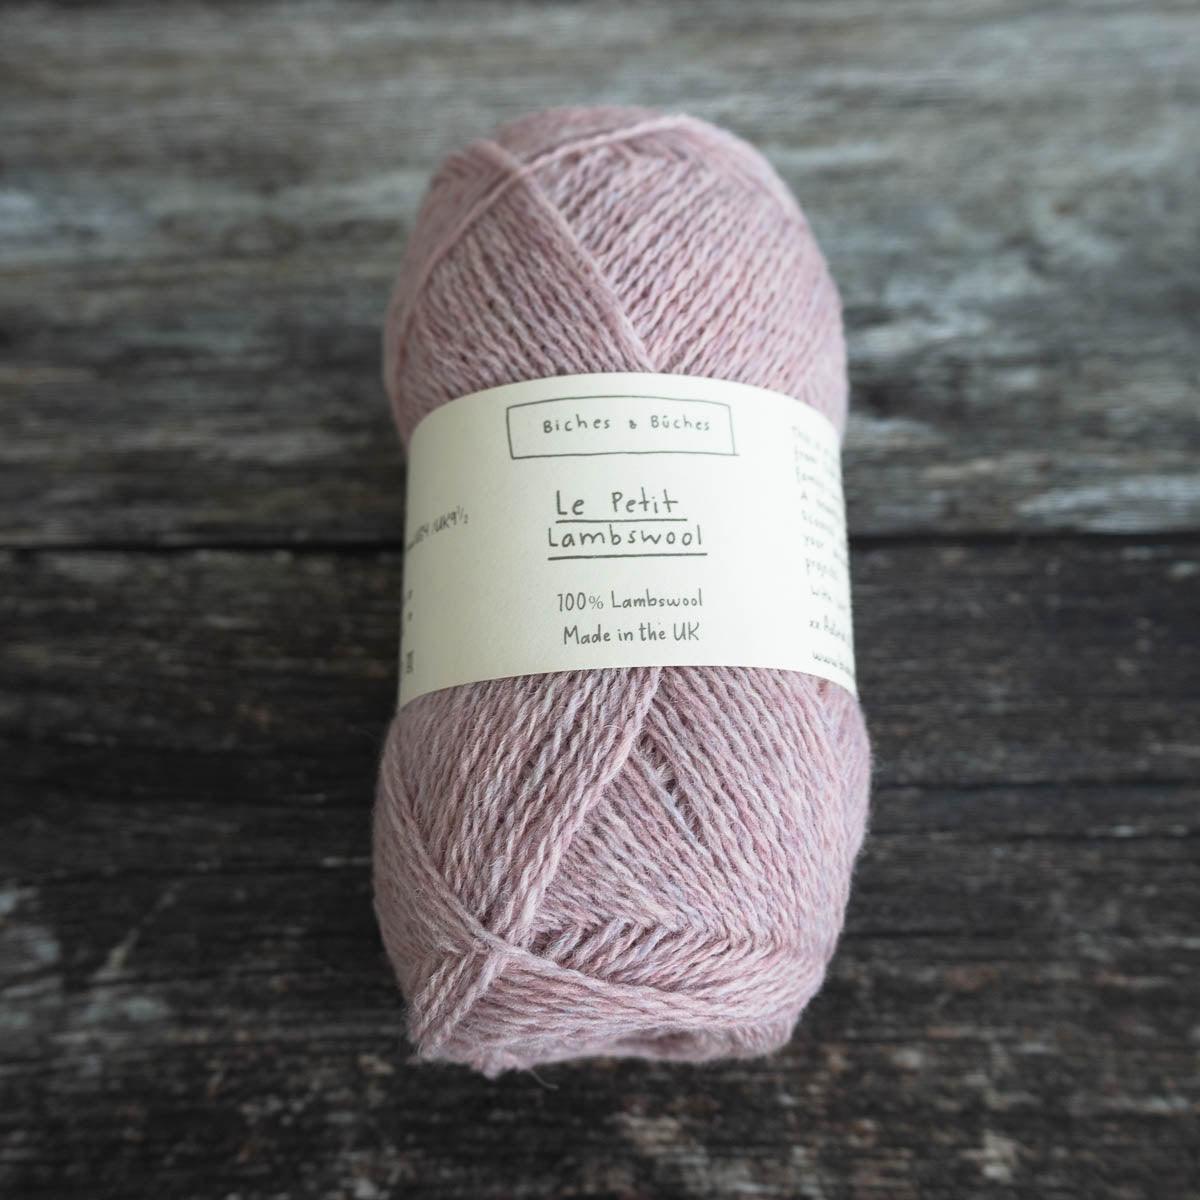 Biches & Bûches Biches & Bûches Le Petit Lambswool - Soft Pink Grey - 4ply Knitting Yarn